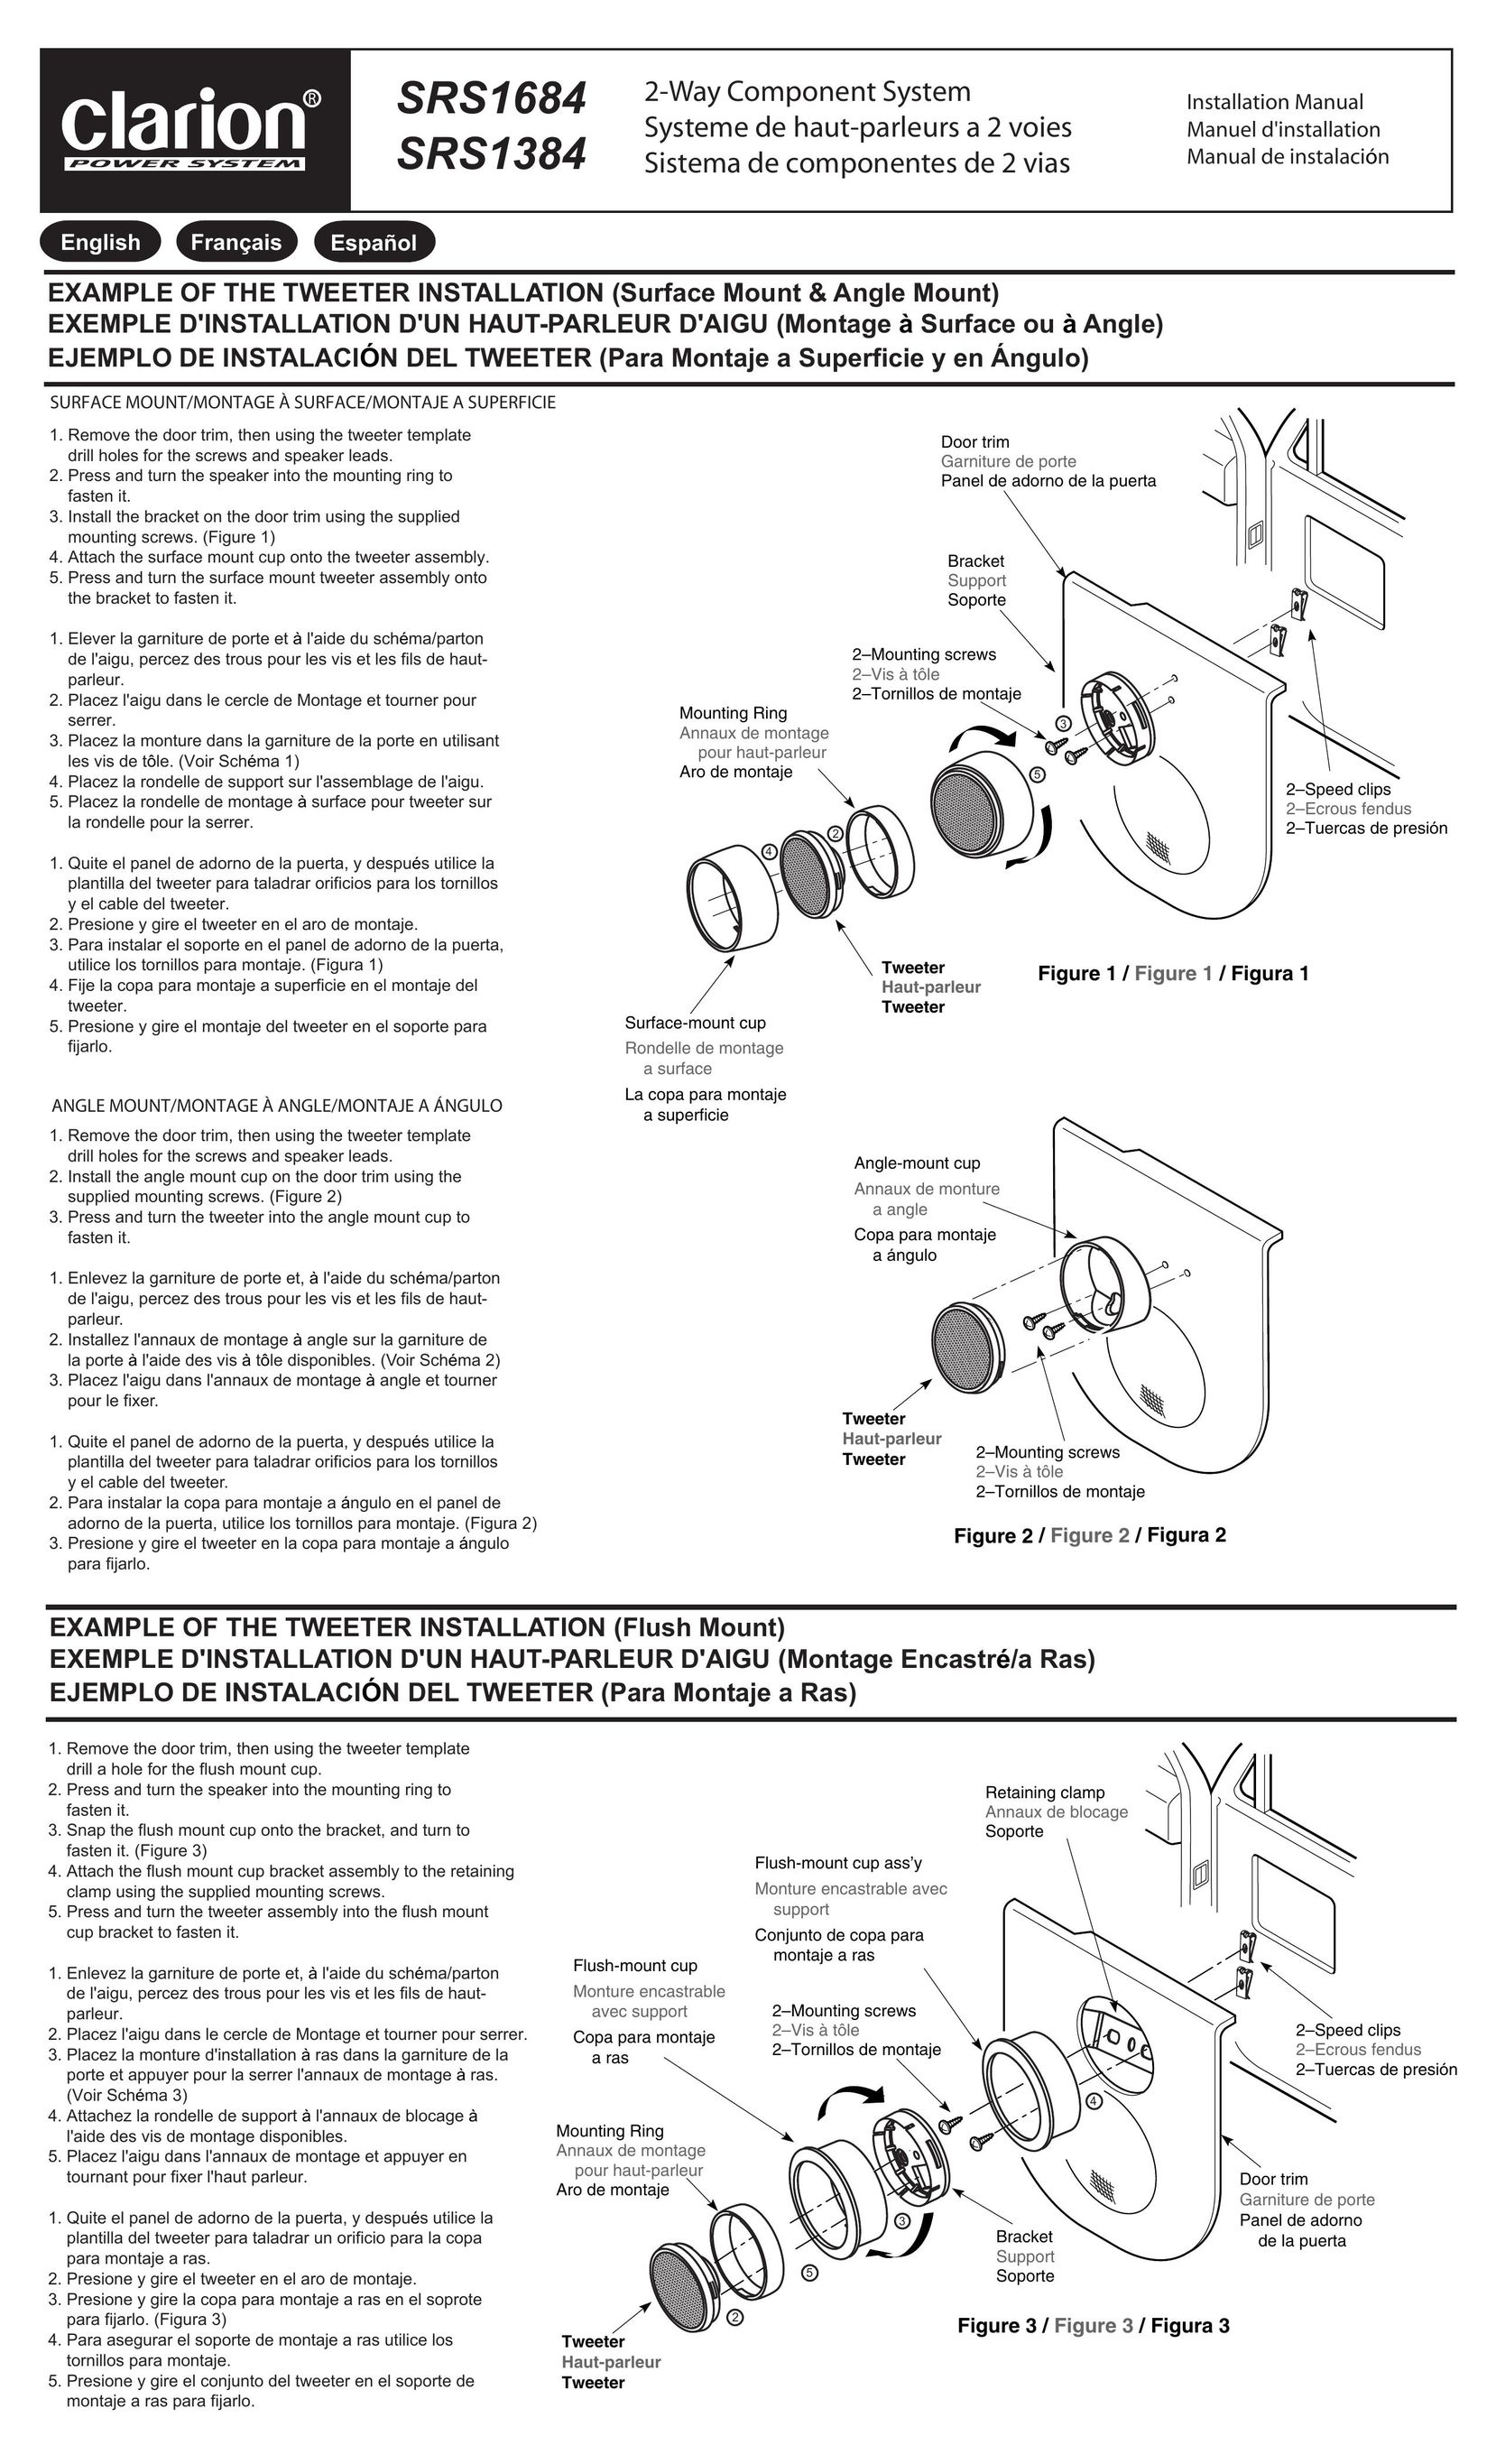 Clarion SRS1684 Stereo System User Manual